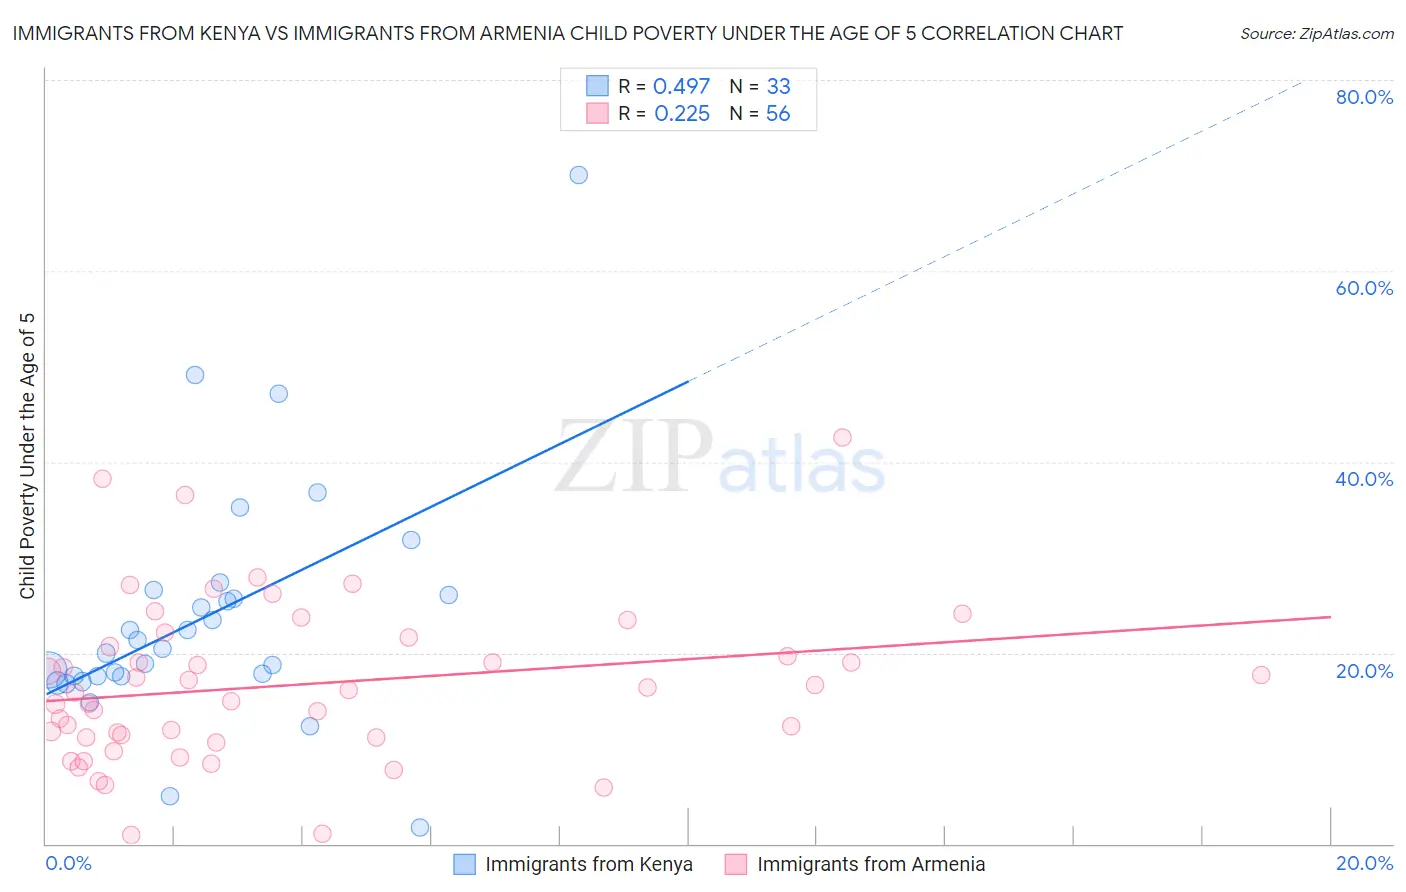 Immigrants from Kenya vs Immigrants from Armenia Child Poverty Under the Age of 5